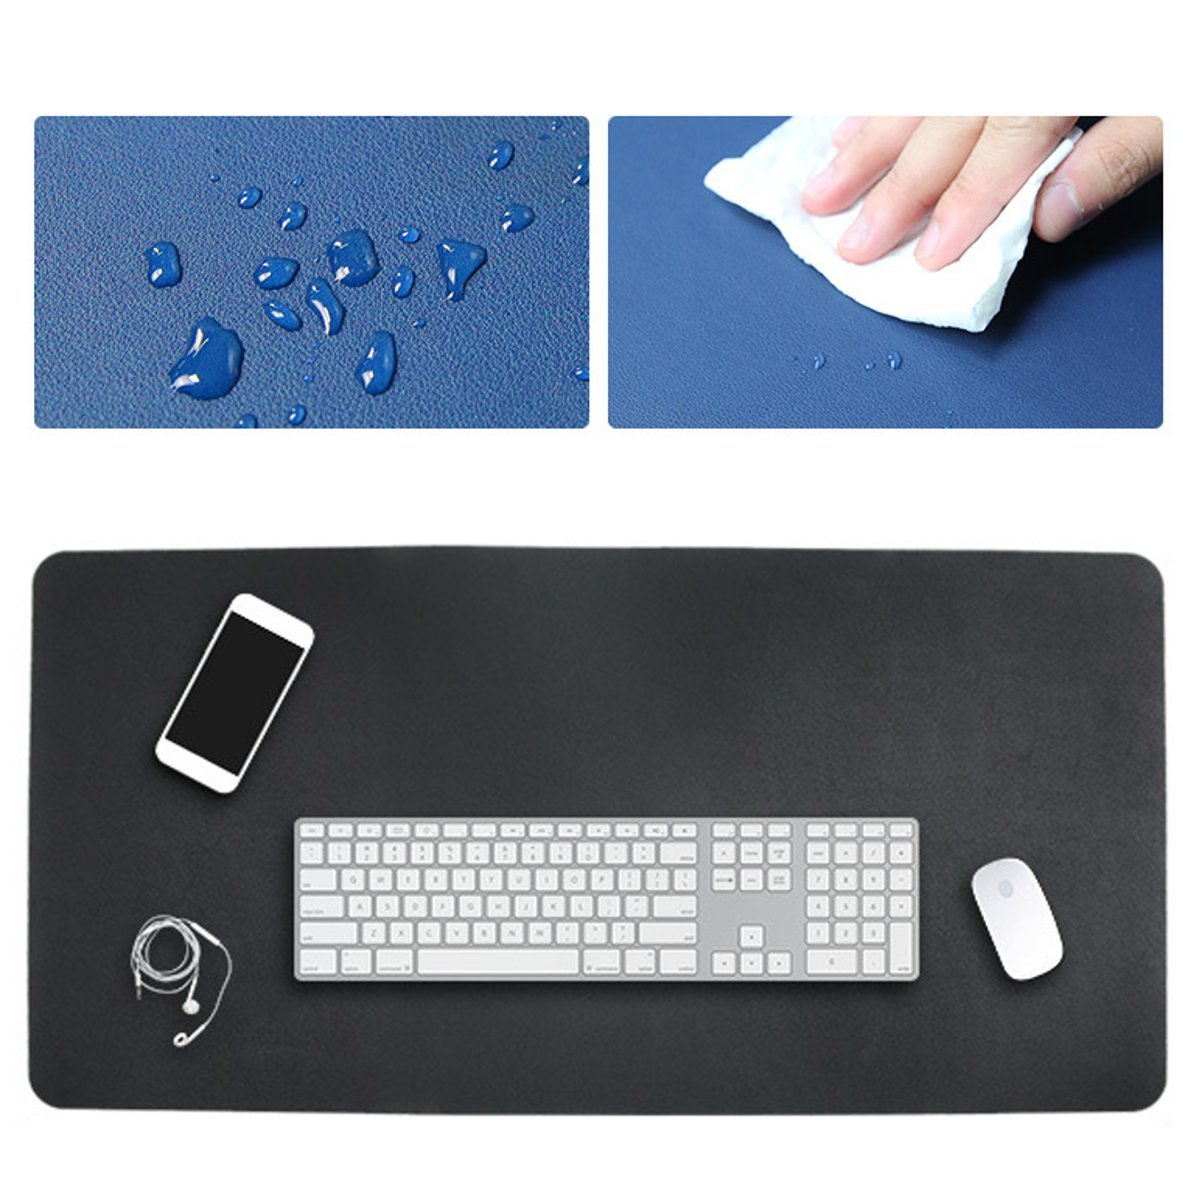 120x60cm Both Sides Two Colors PU leather Mouse Pad Mat Large Office Gaming Desk Mat 1